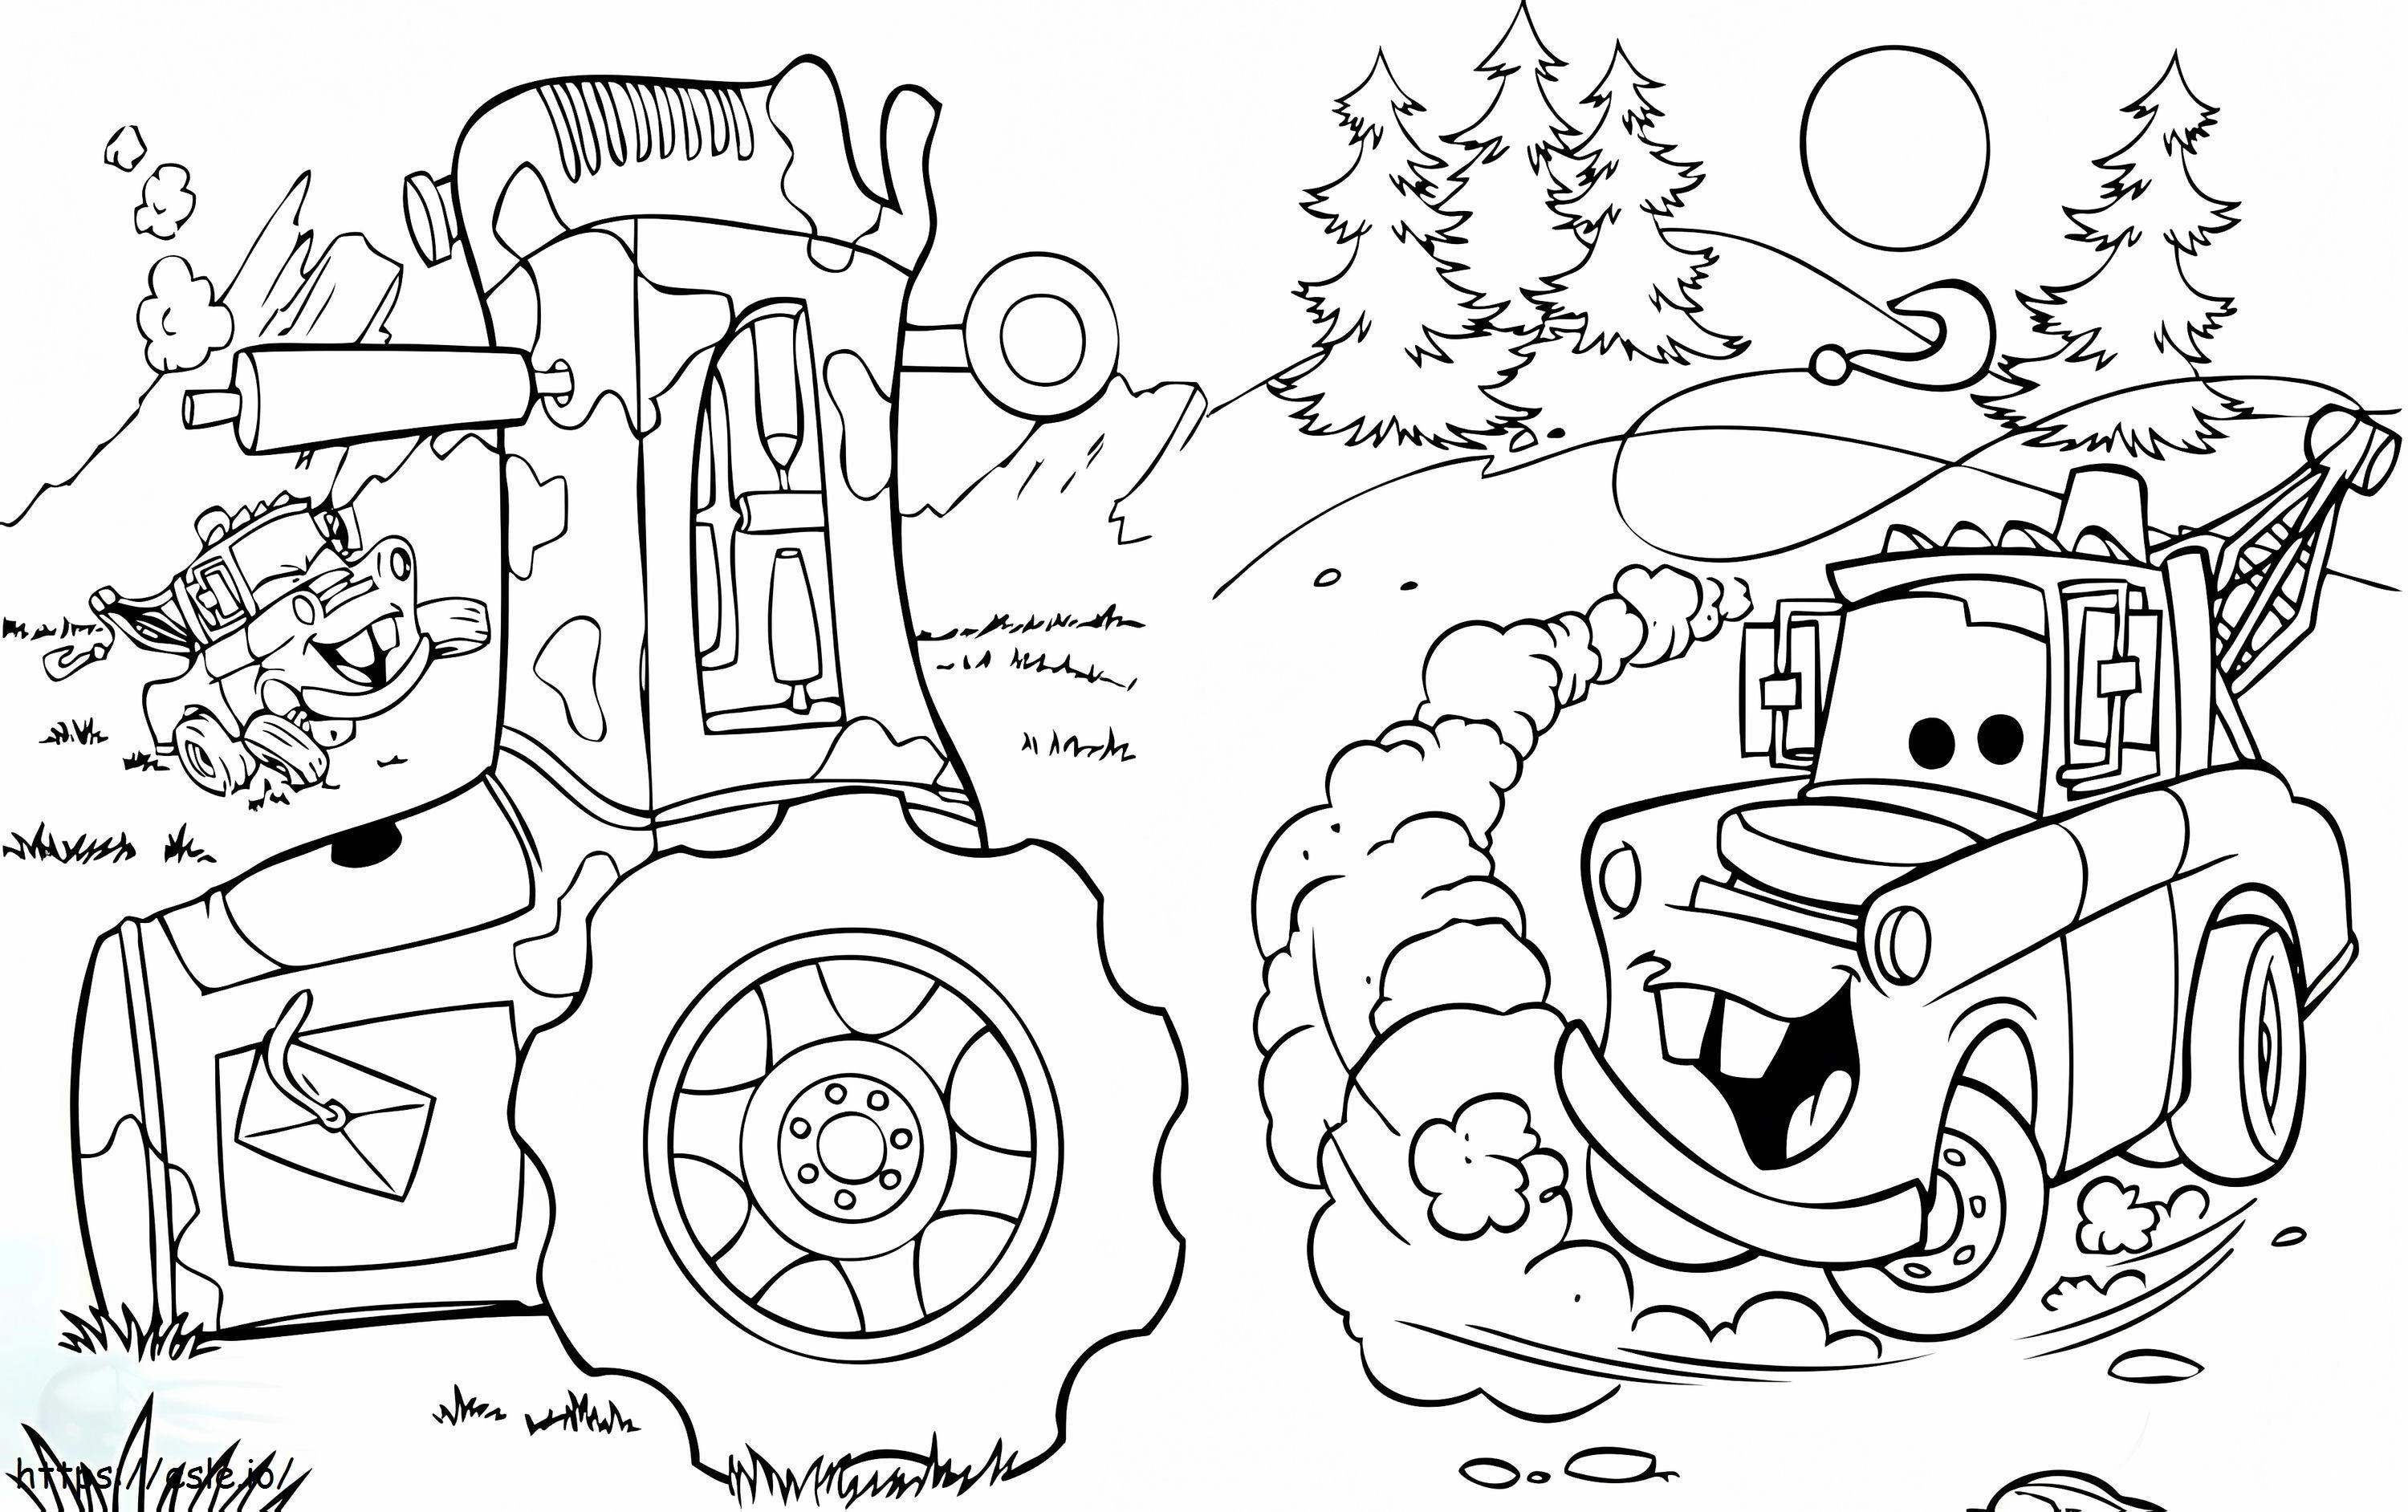 Bus Watch coloring page